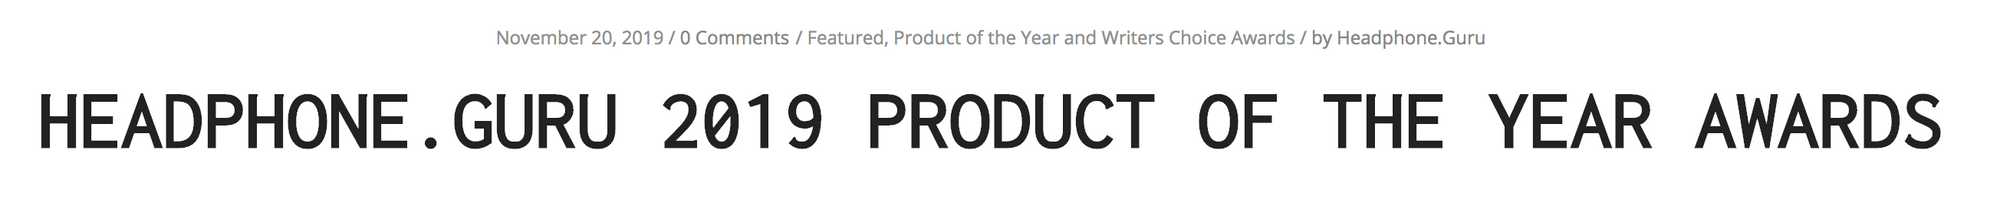 Headphone Guru gives the LCD-1 and LCD-GX their Product of the Year Awards!